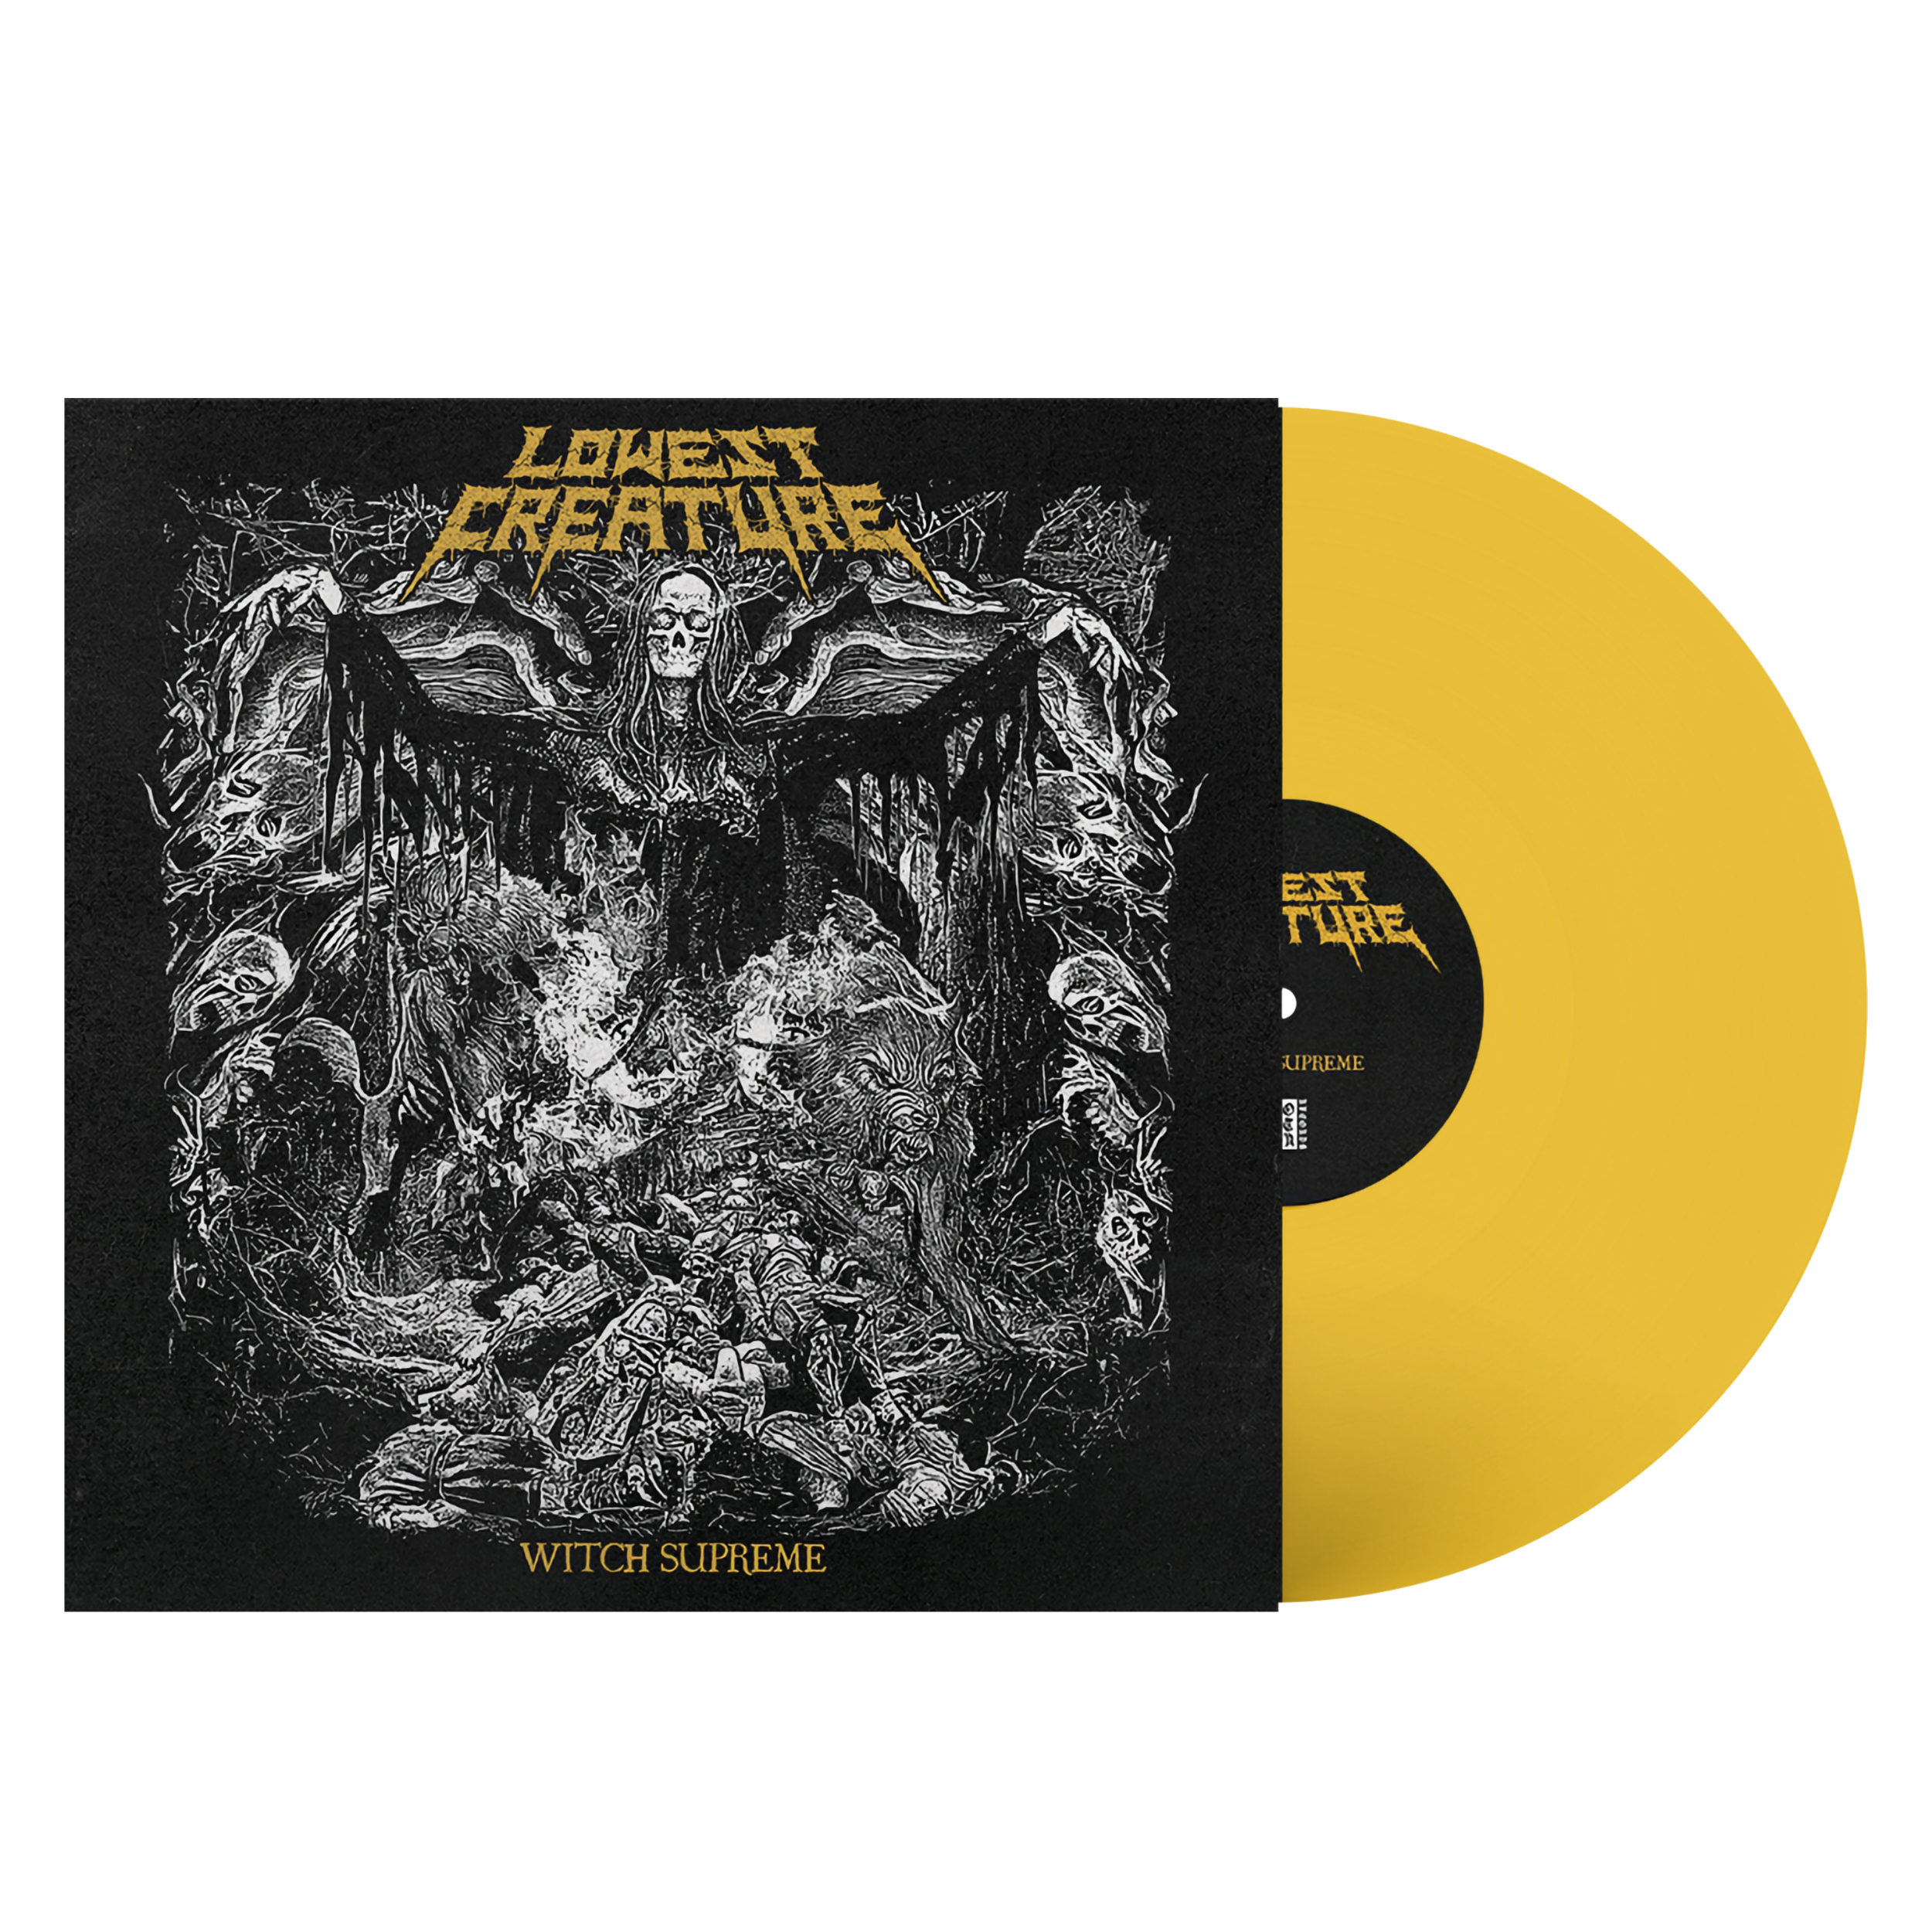 Lowest Creature - Witch Supreme - Vinyl - Yellow.png